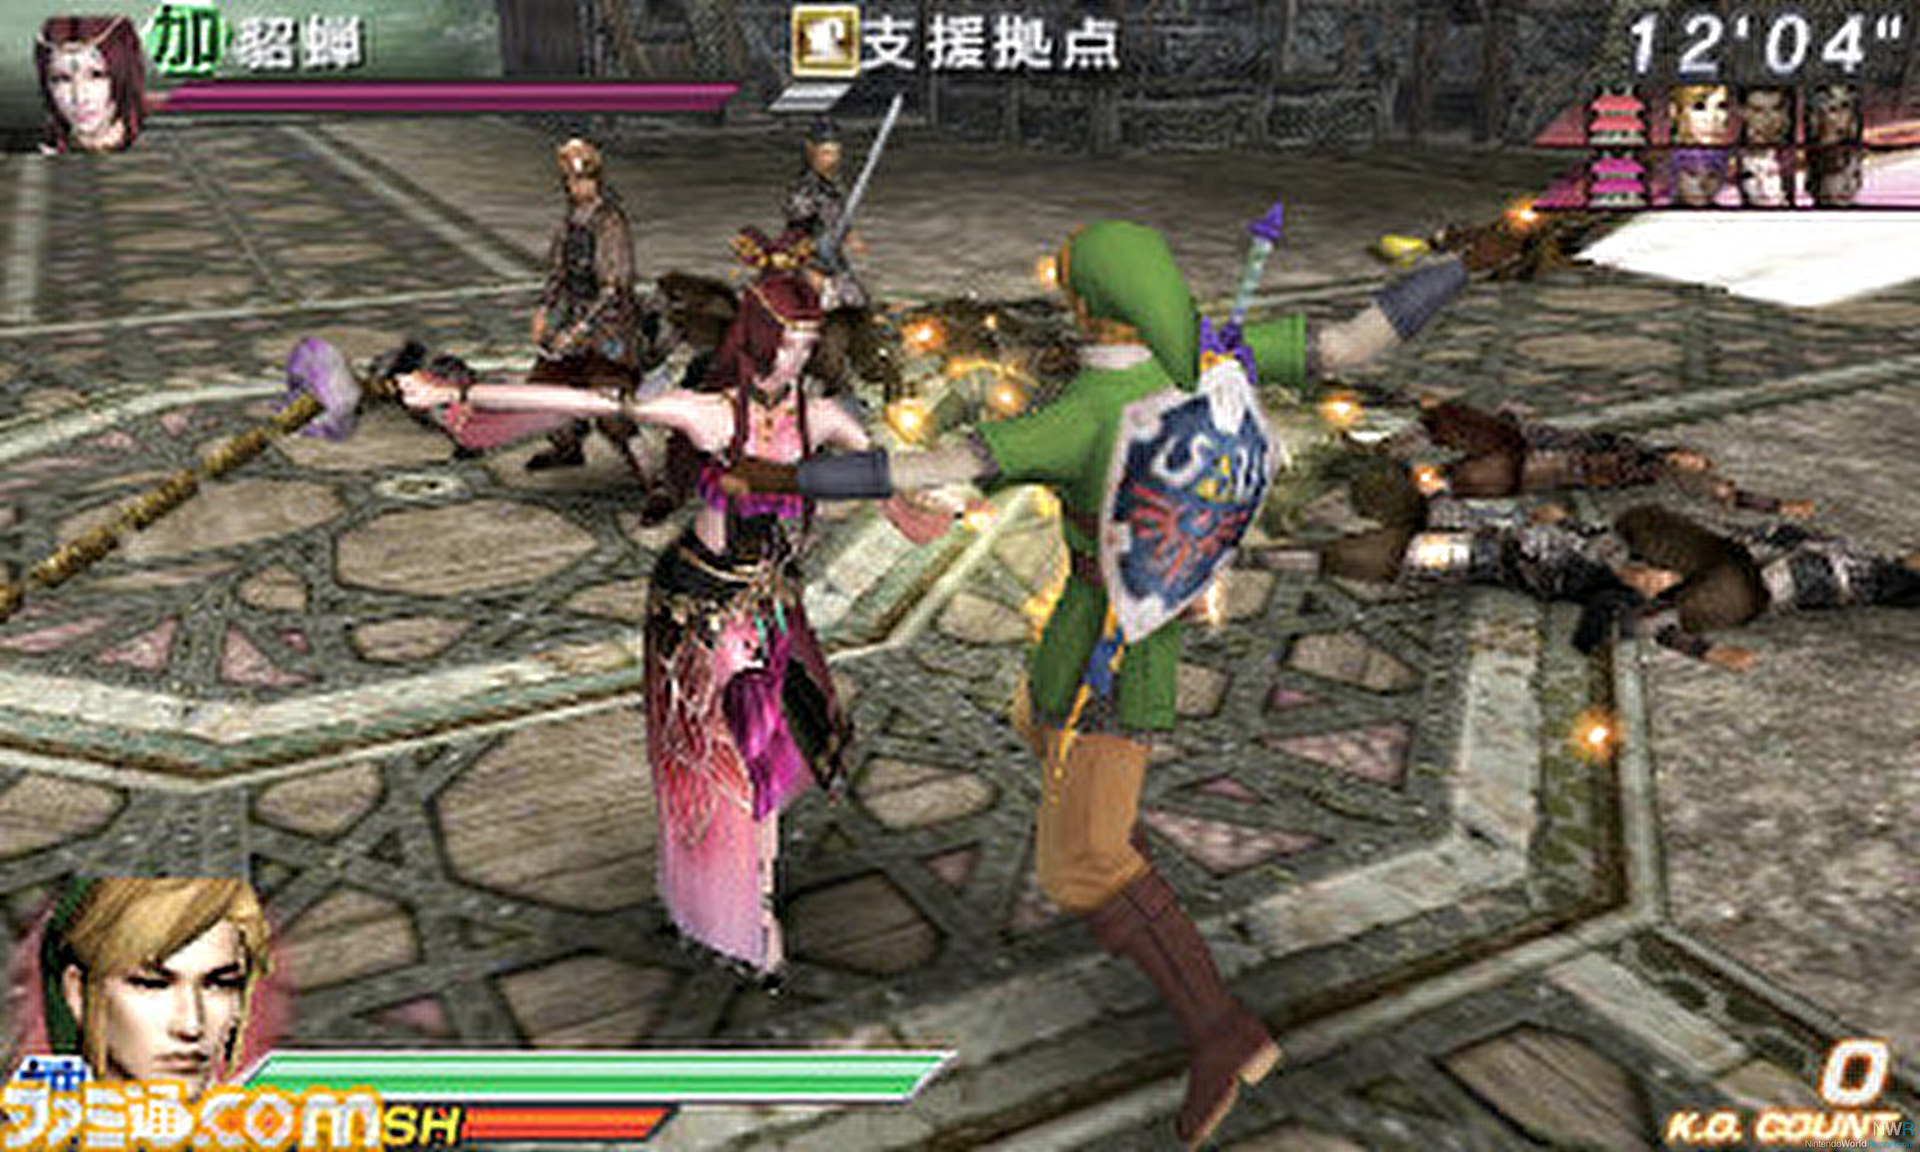 Link and Samus Costumes to Appear in Dynasty Warriors Vs. - News - Nintendo  World Report